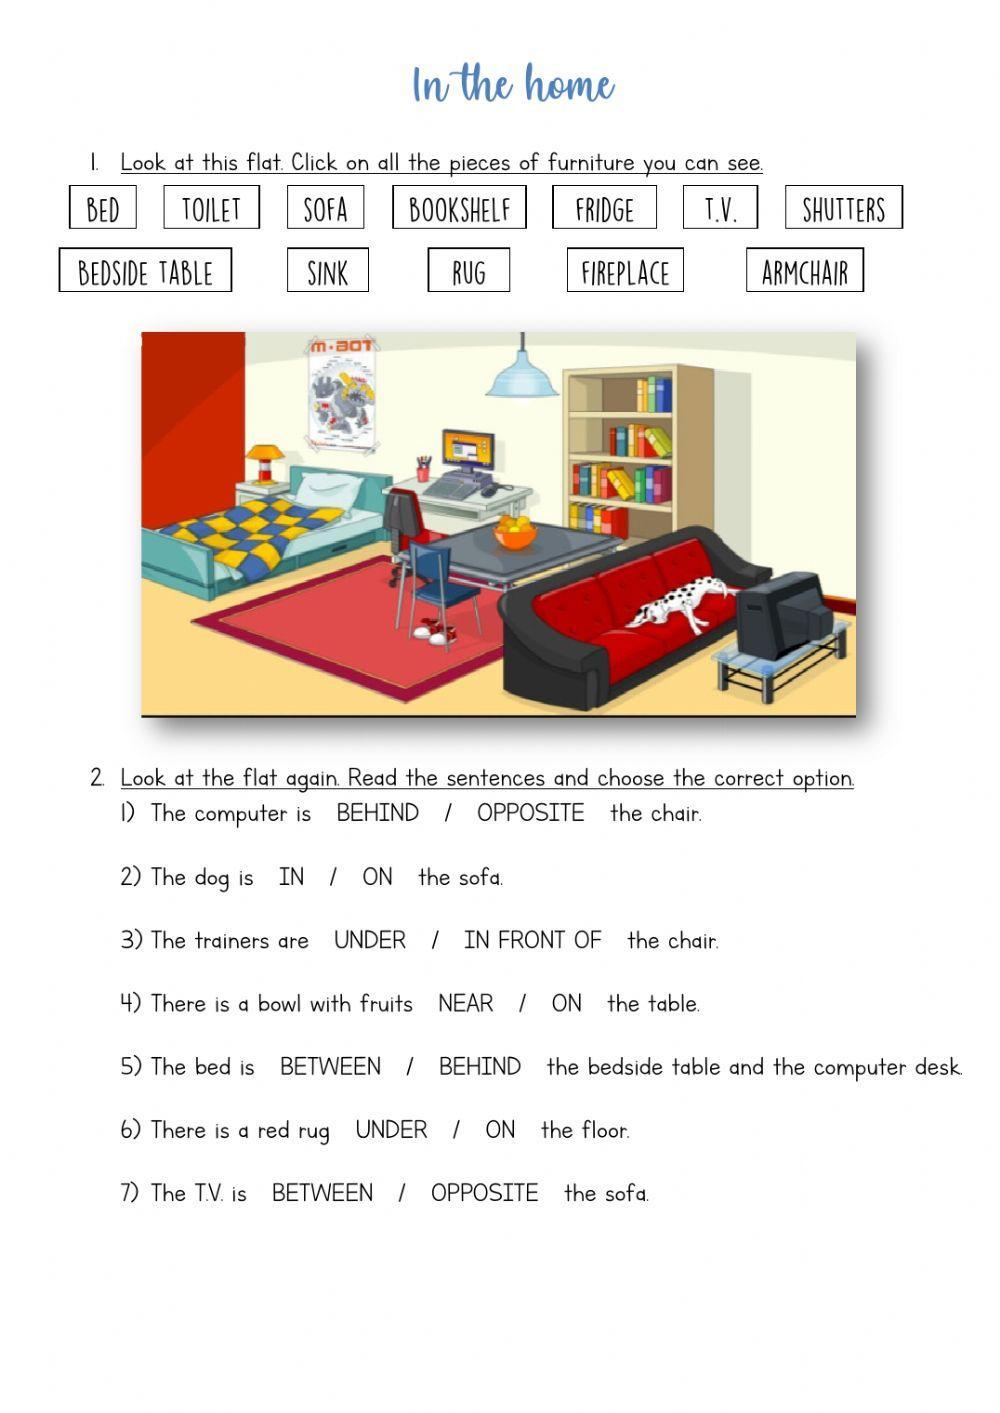 In the home - furniture and prepositions of place